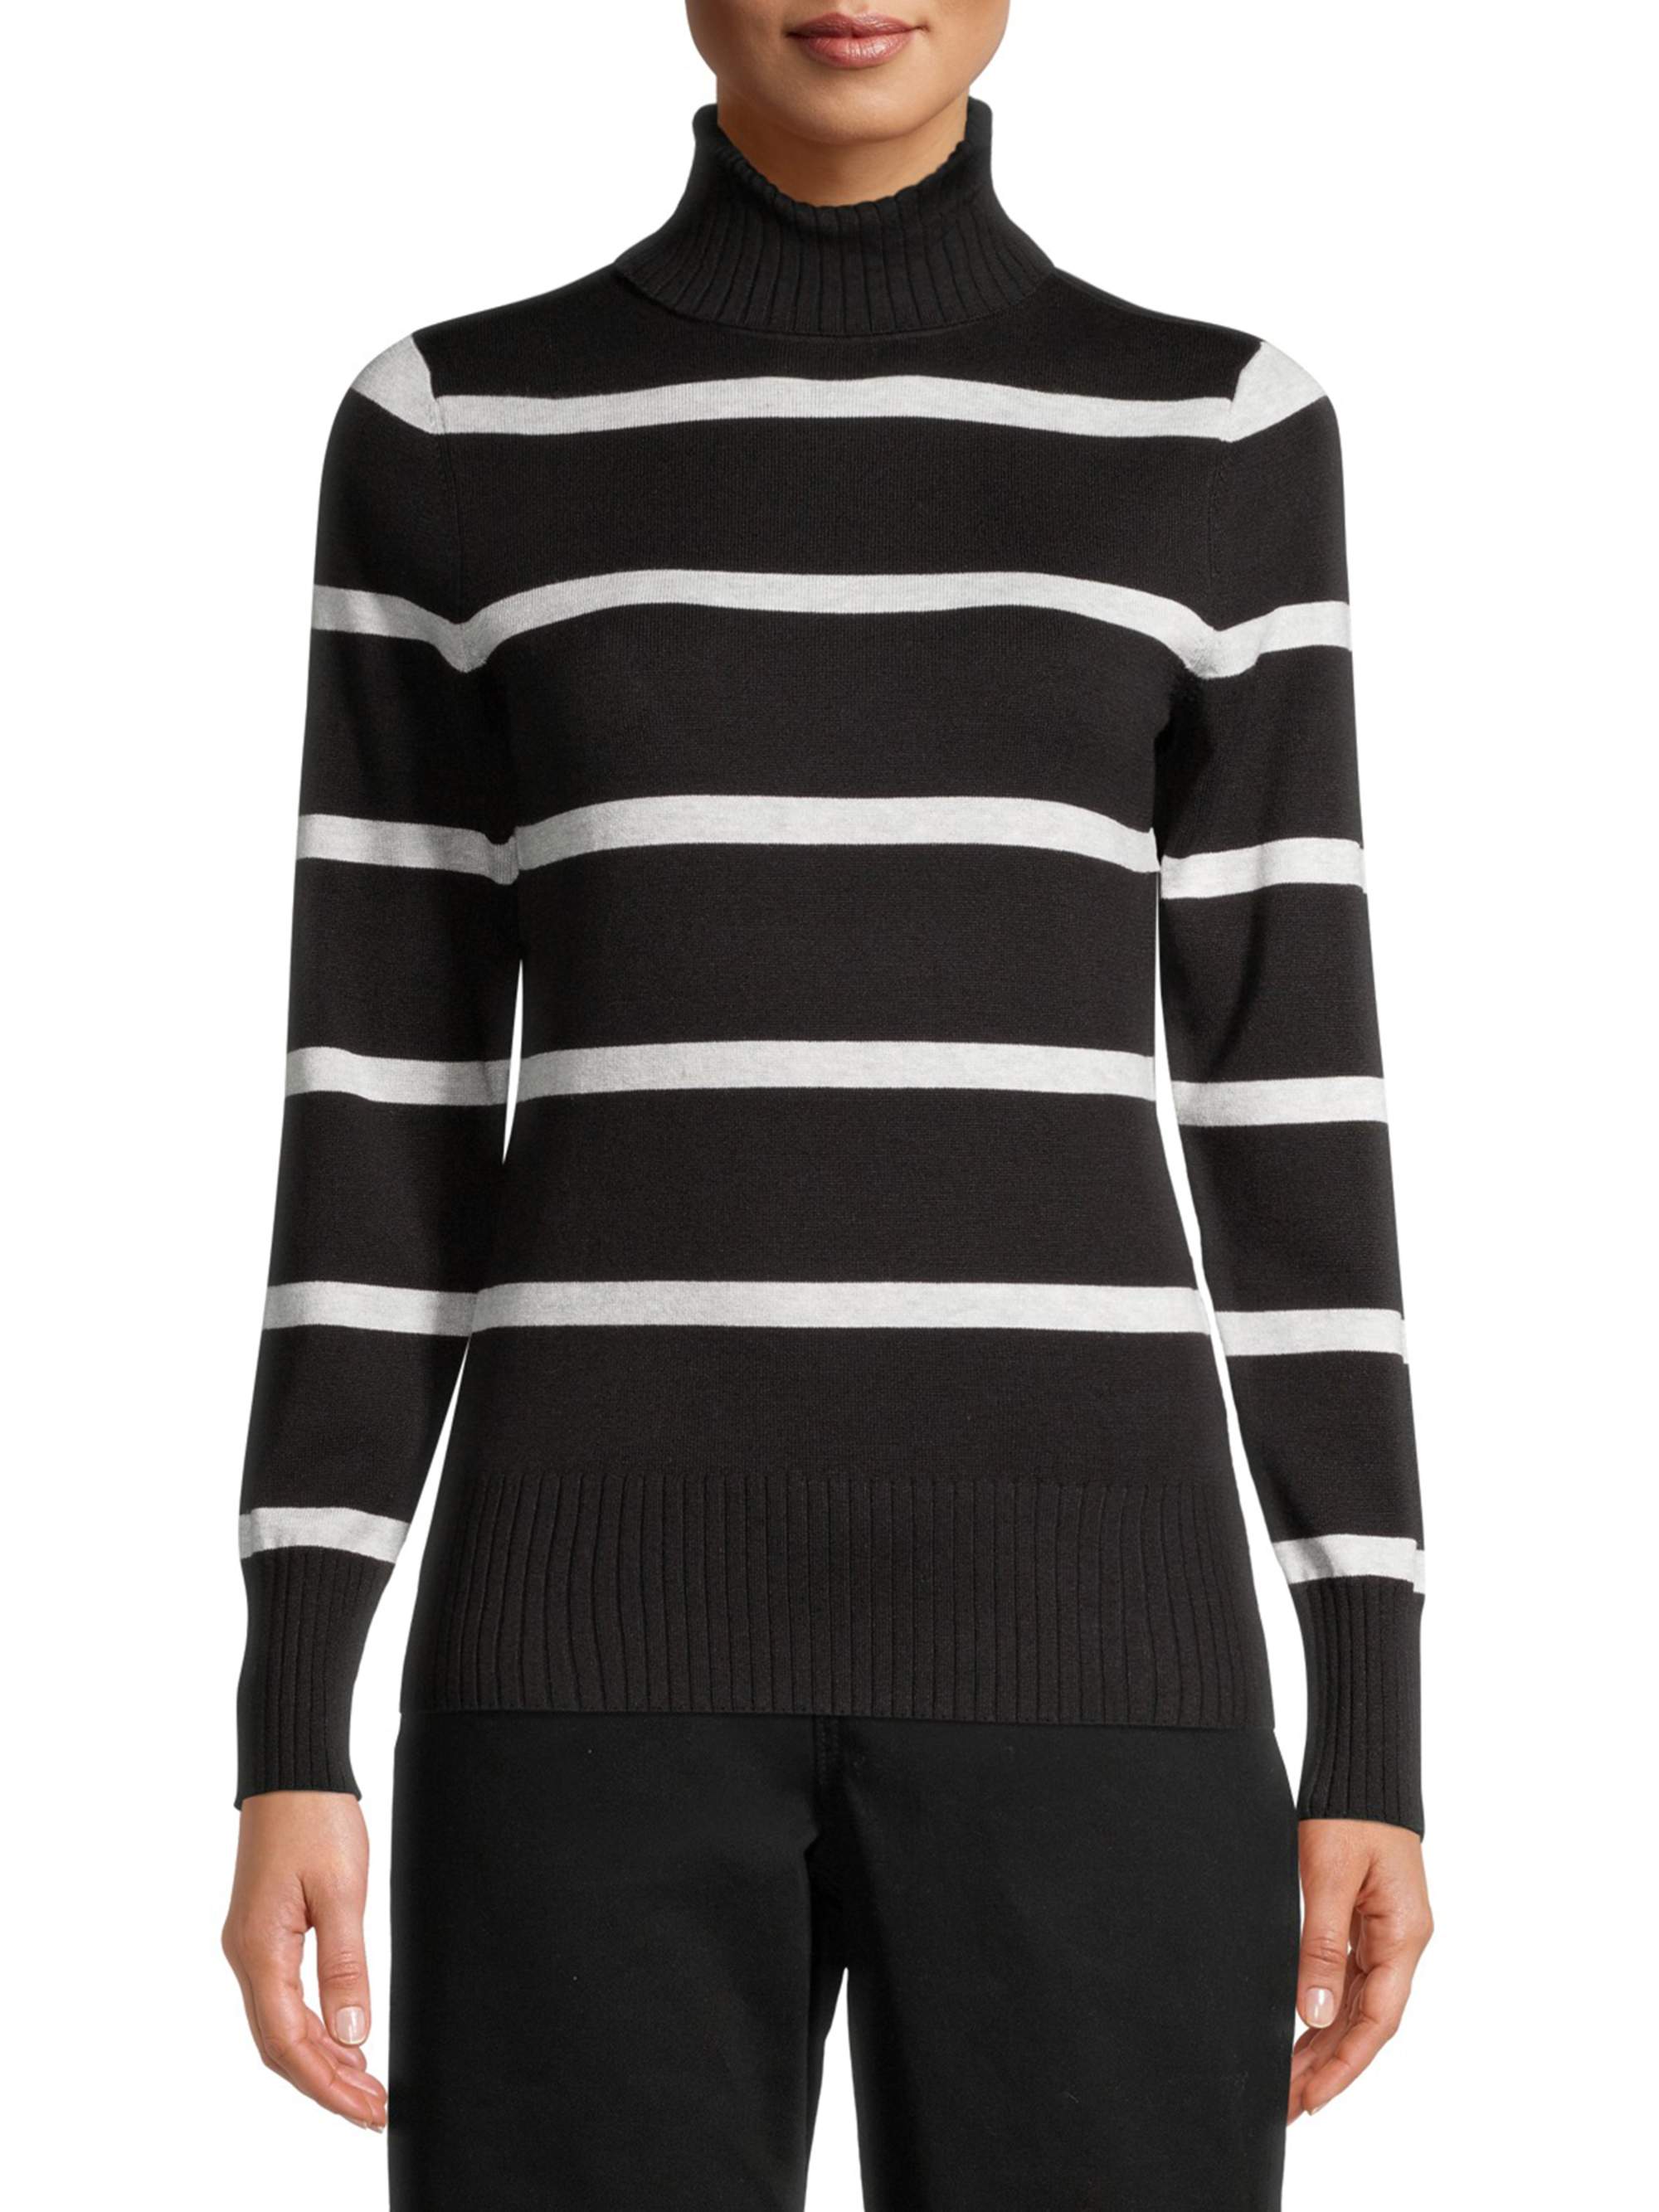 Time and Tru Women's Striped Turtleneck Sweater - image 1 of 6